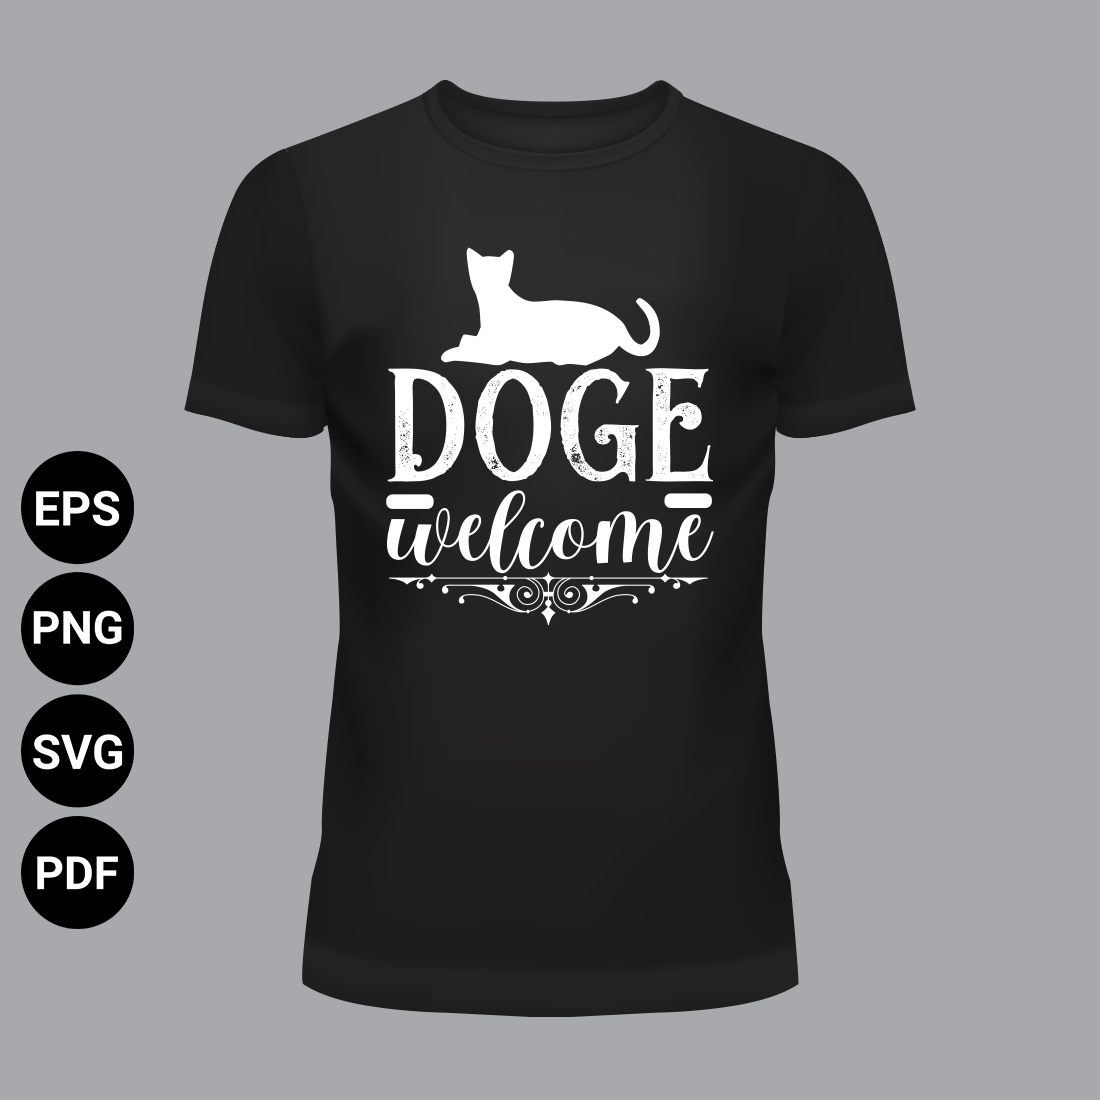 Doge Welcome T-shirt design preview image.